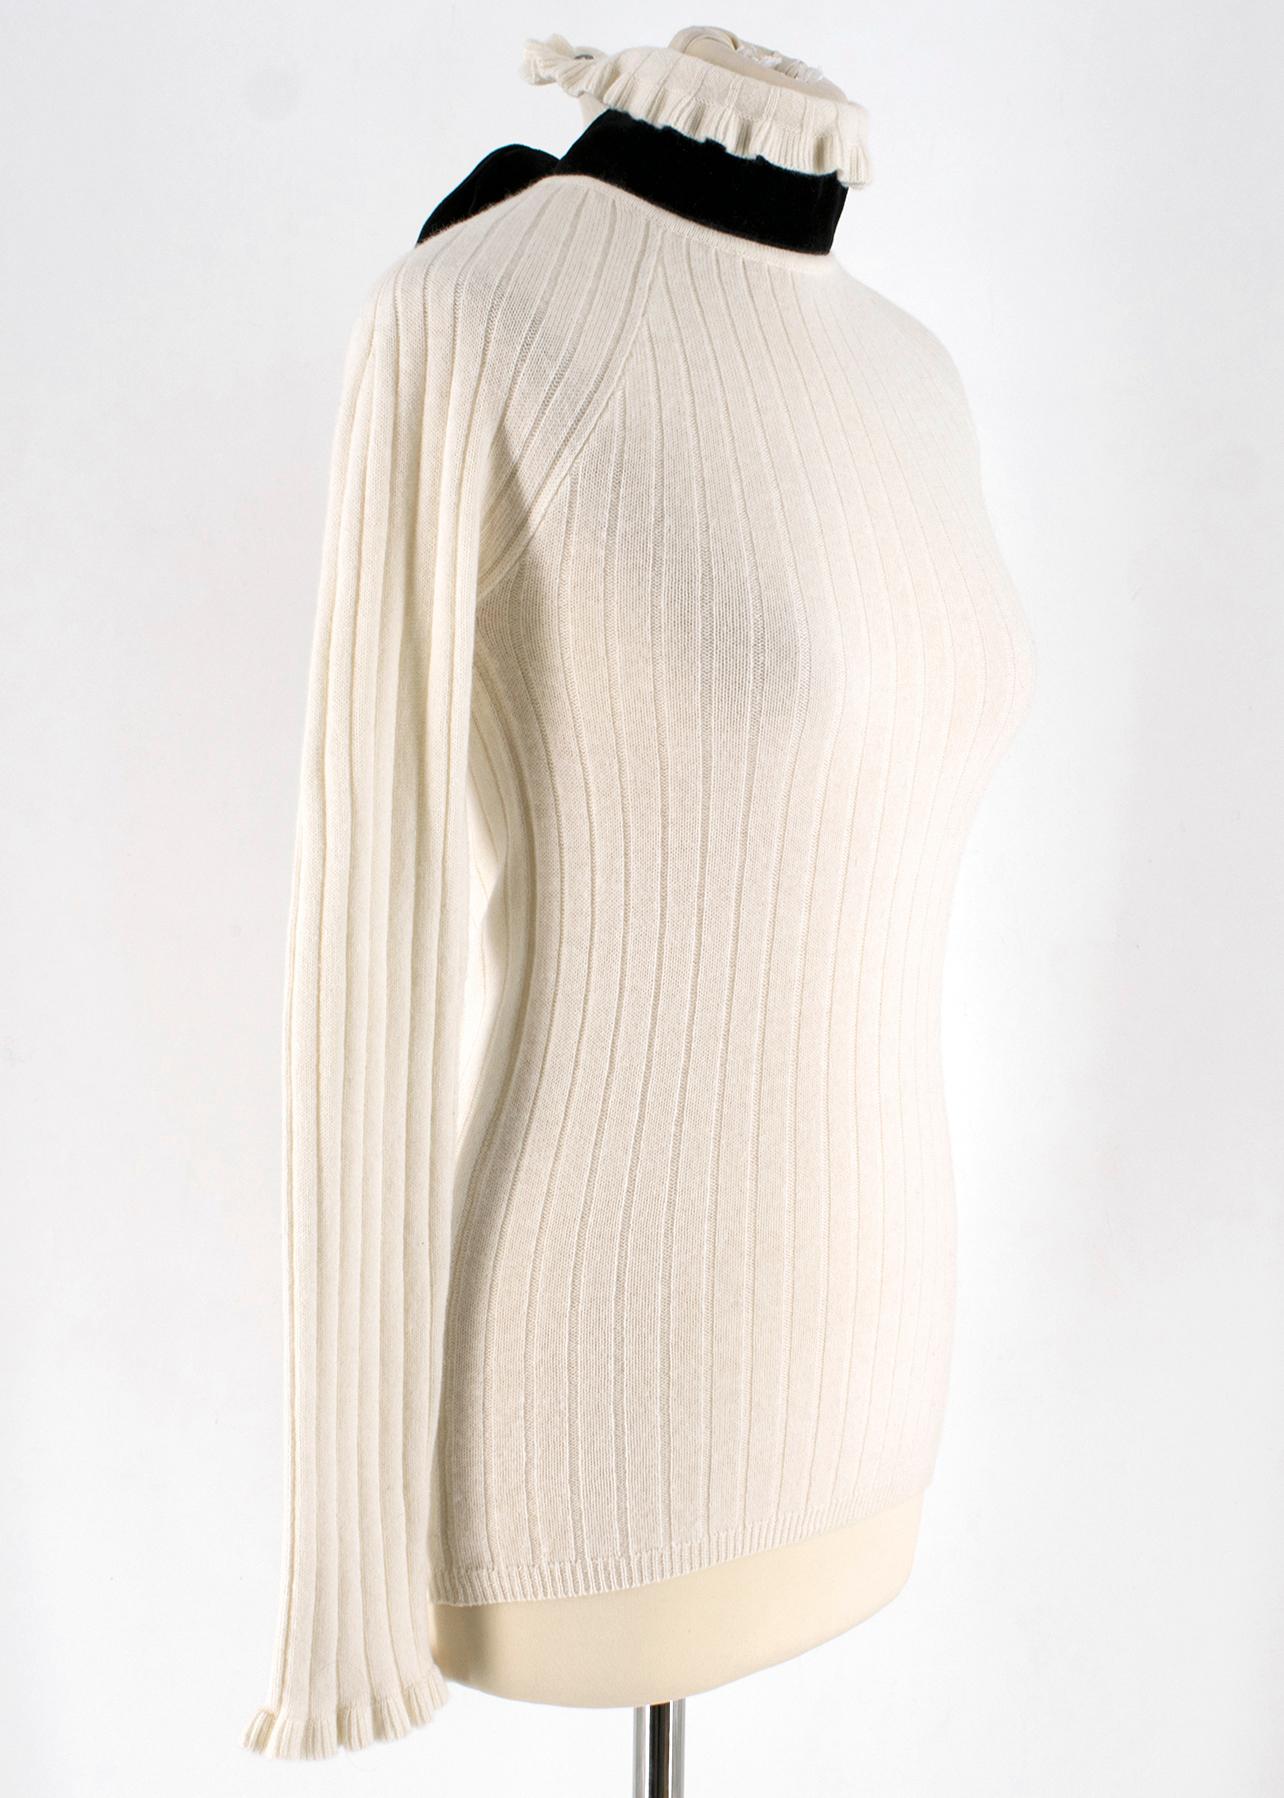 Erdem White Wool blend Open Back Sweater

- white wool blend sweater 
- high neck
- open back line
- button fastening to the neck
- black velvet ribbons around neckline
- long sleeve

Please note, these items are pre-owned and may show some signs of